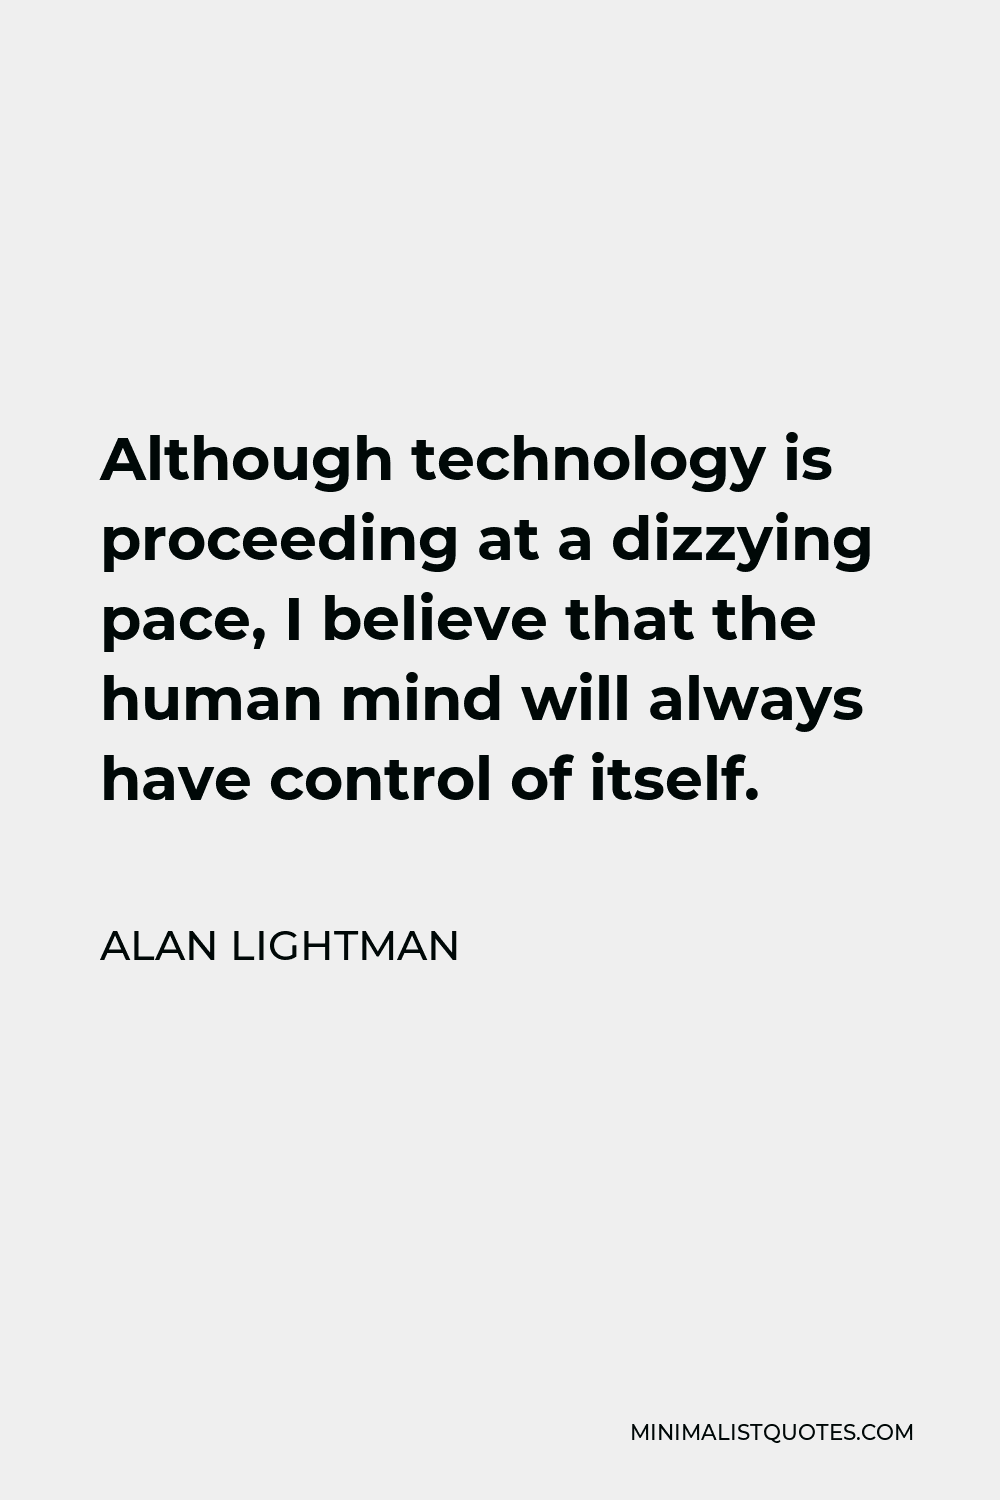 Alan Lightman Quote - Although technology is proceeding at a dizzying pace, I believe that the human mind will always have control of itself.